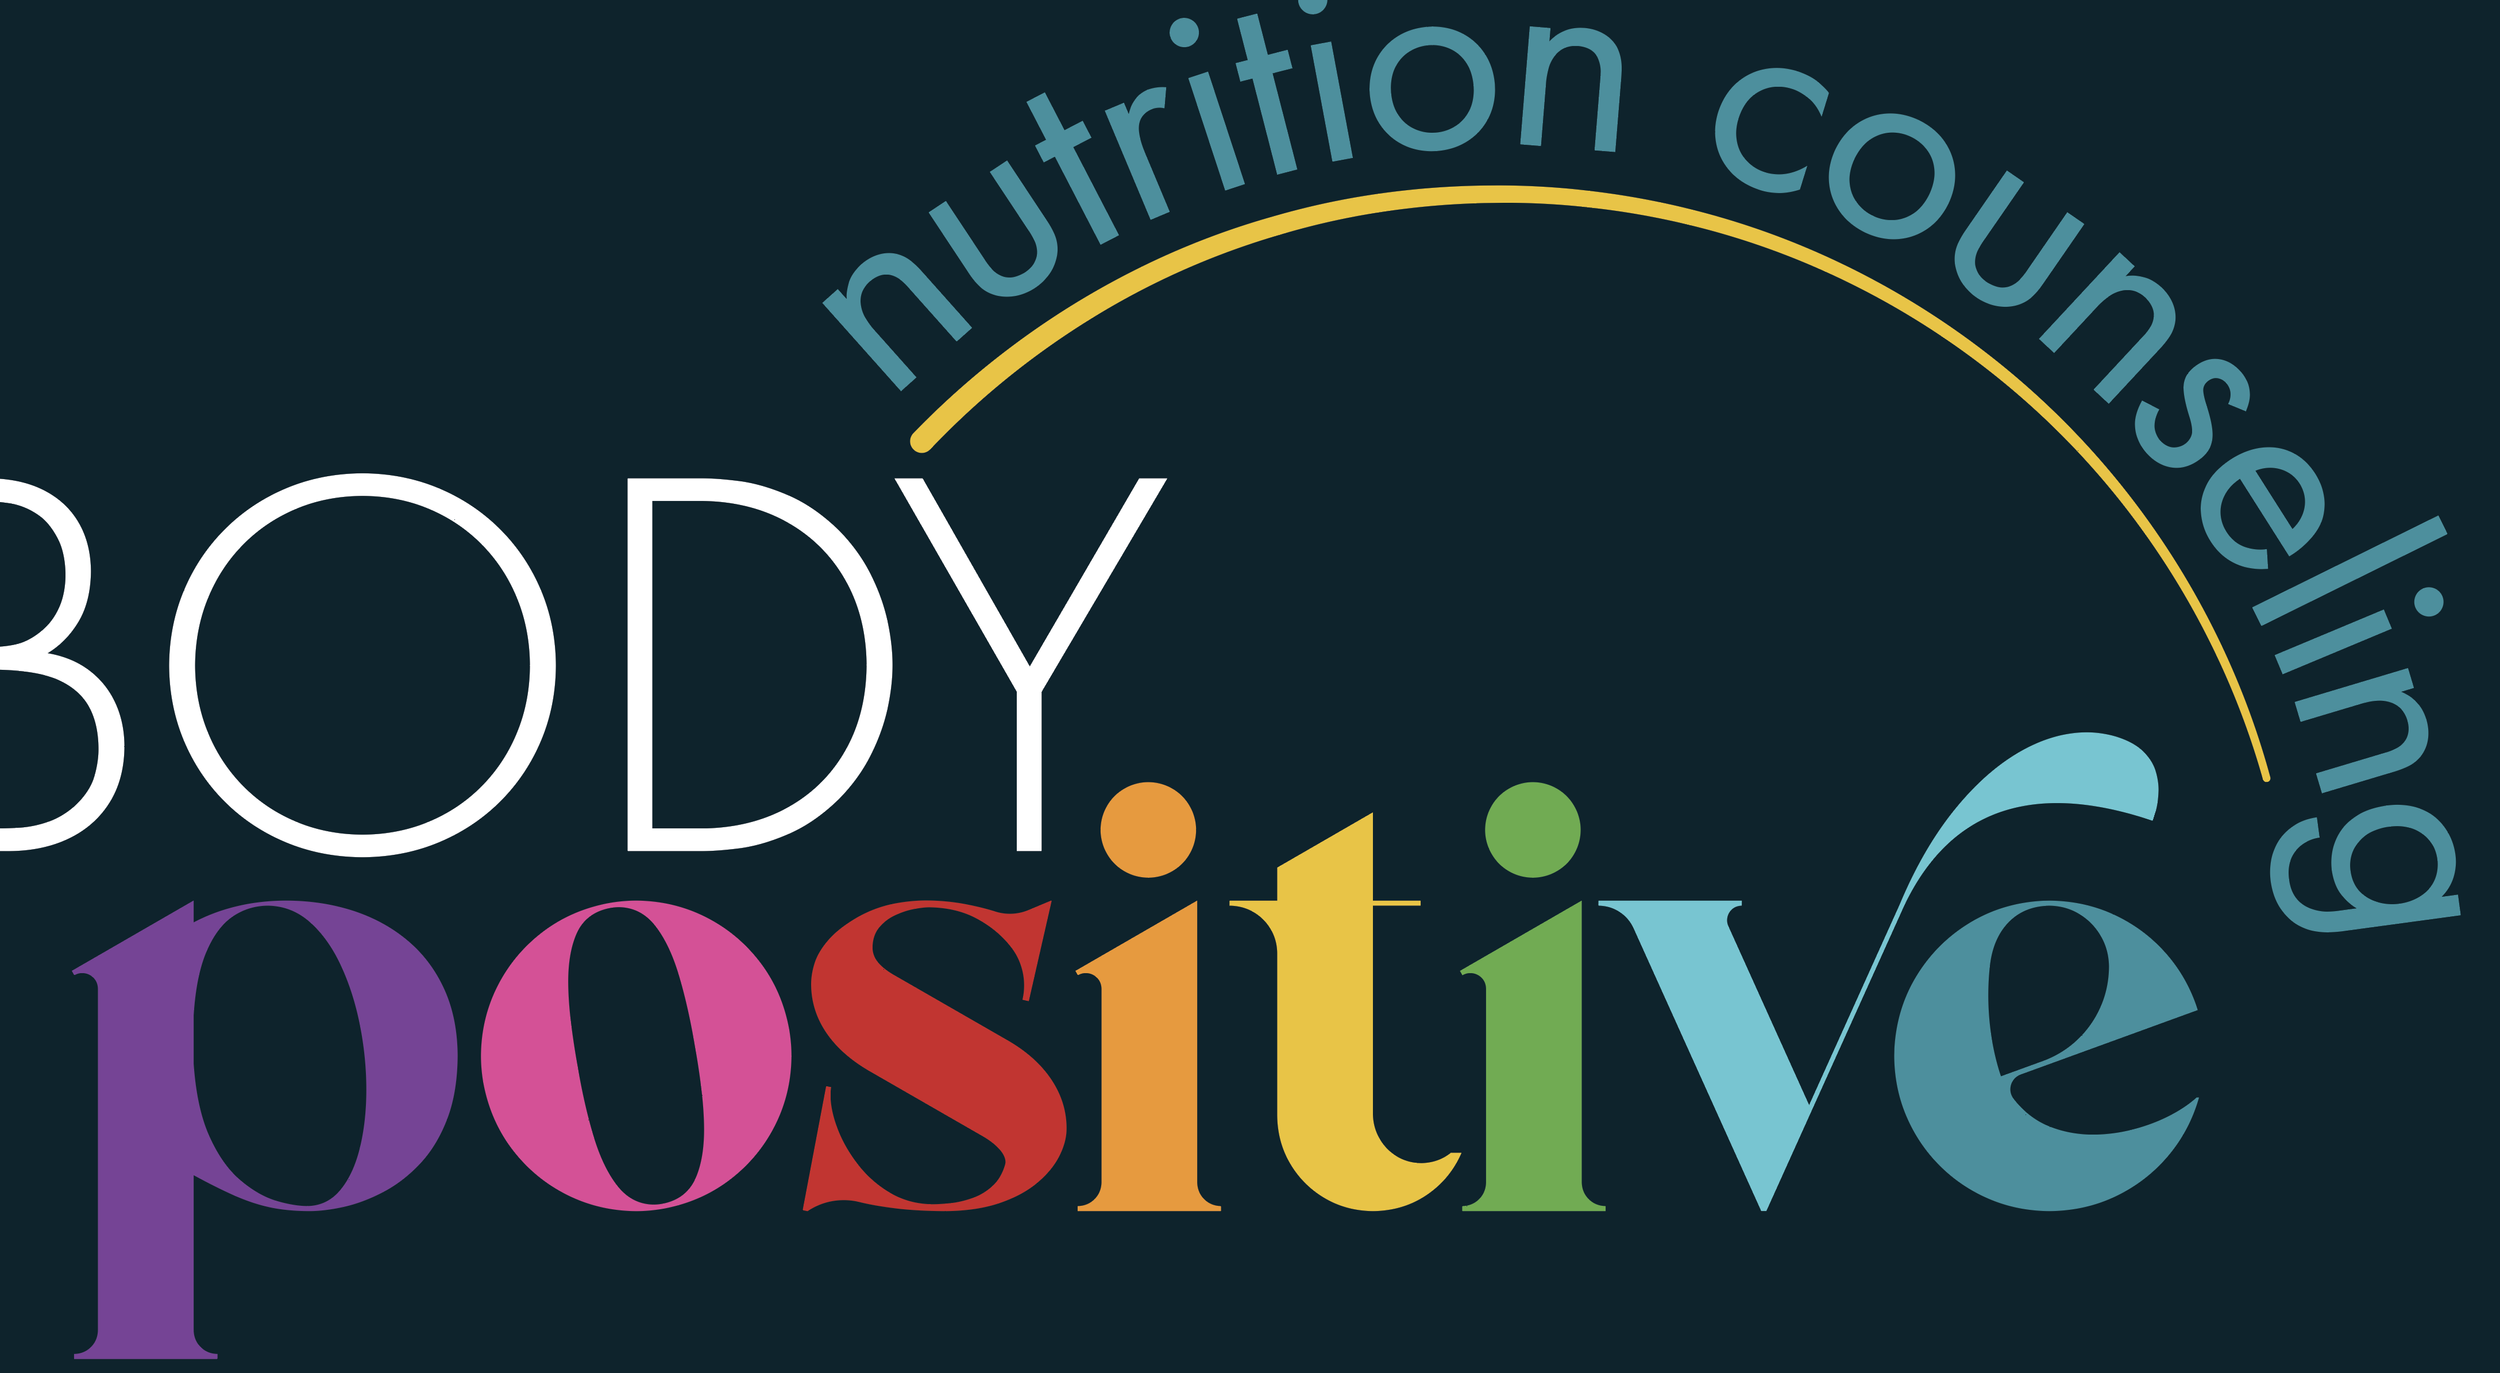 Body Positive Nutrition Counseling (coming soon)